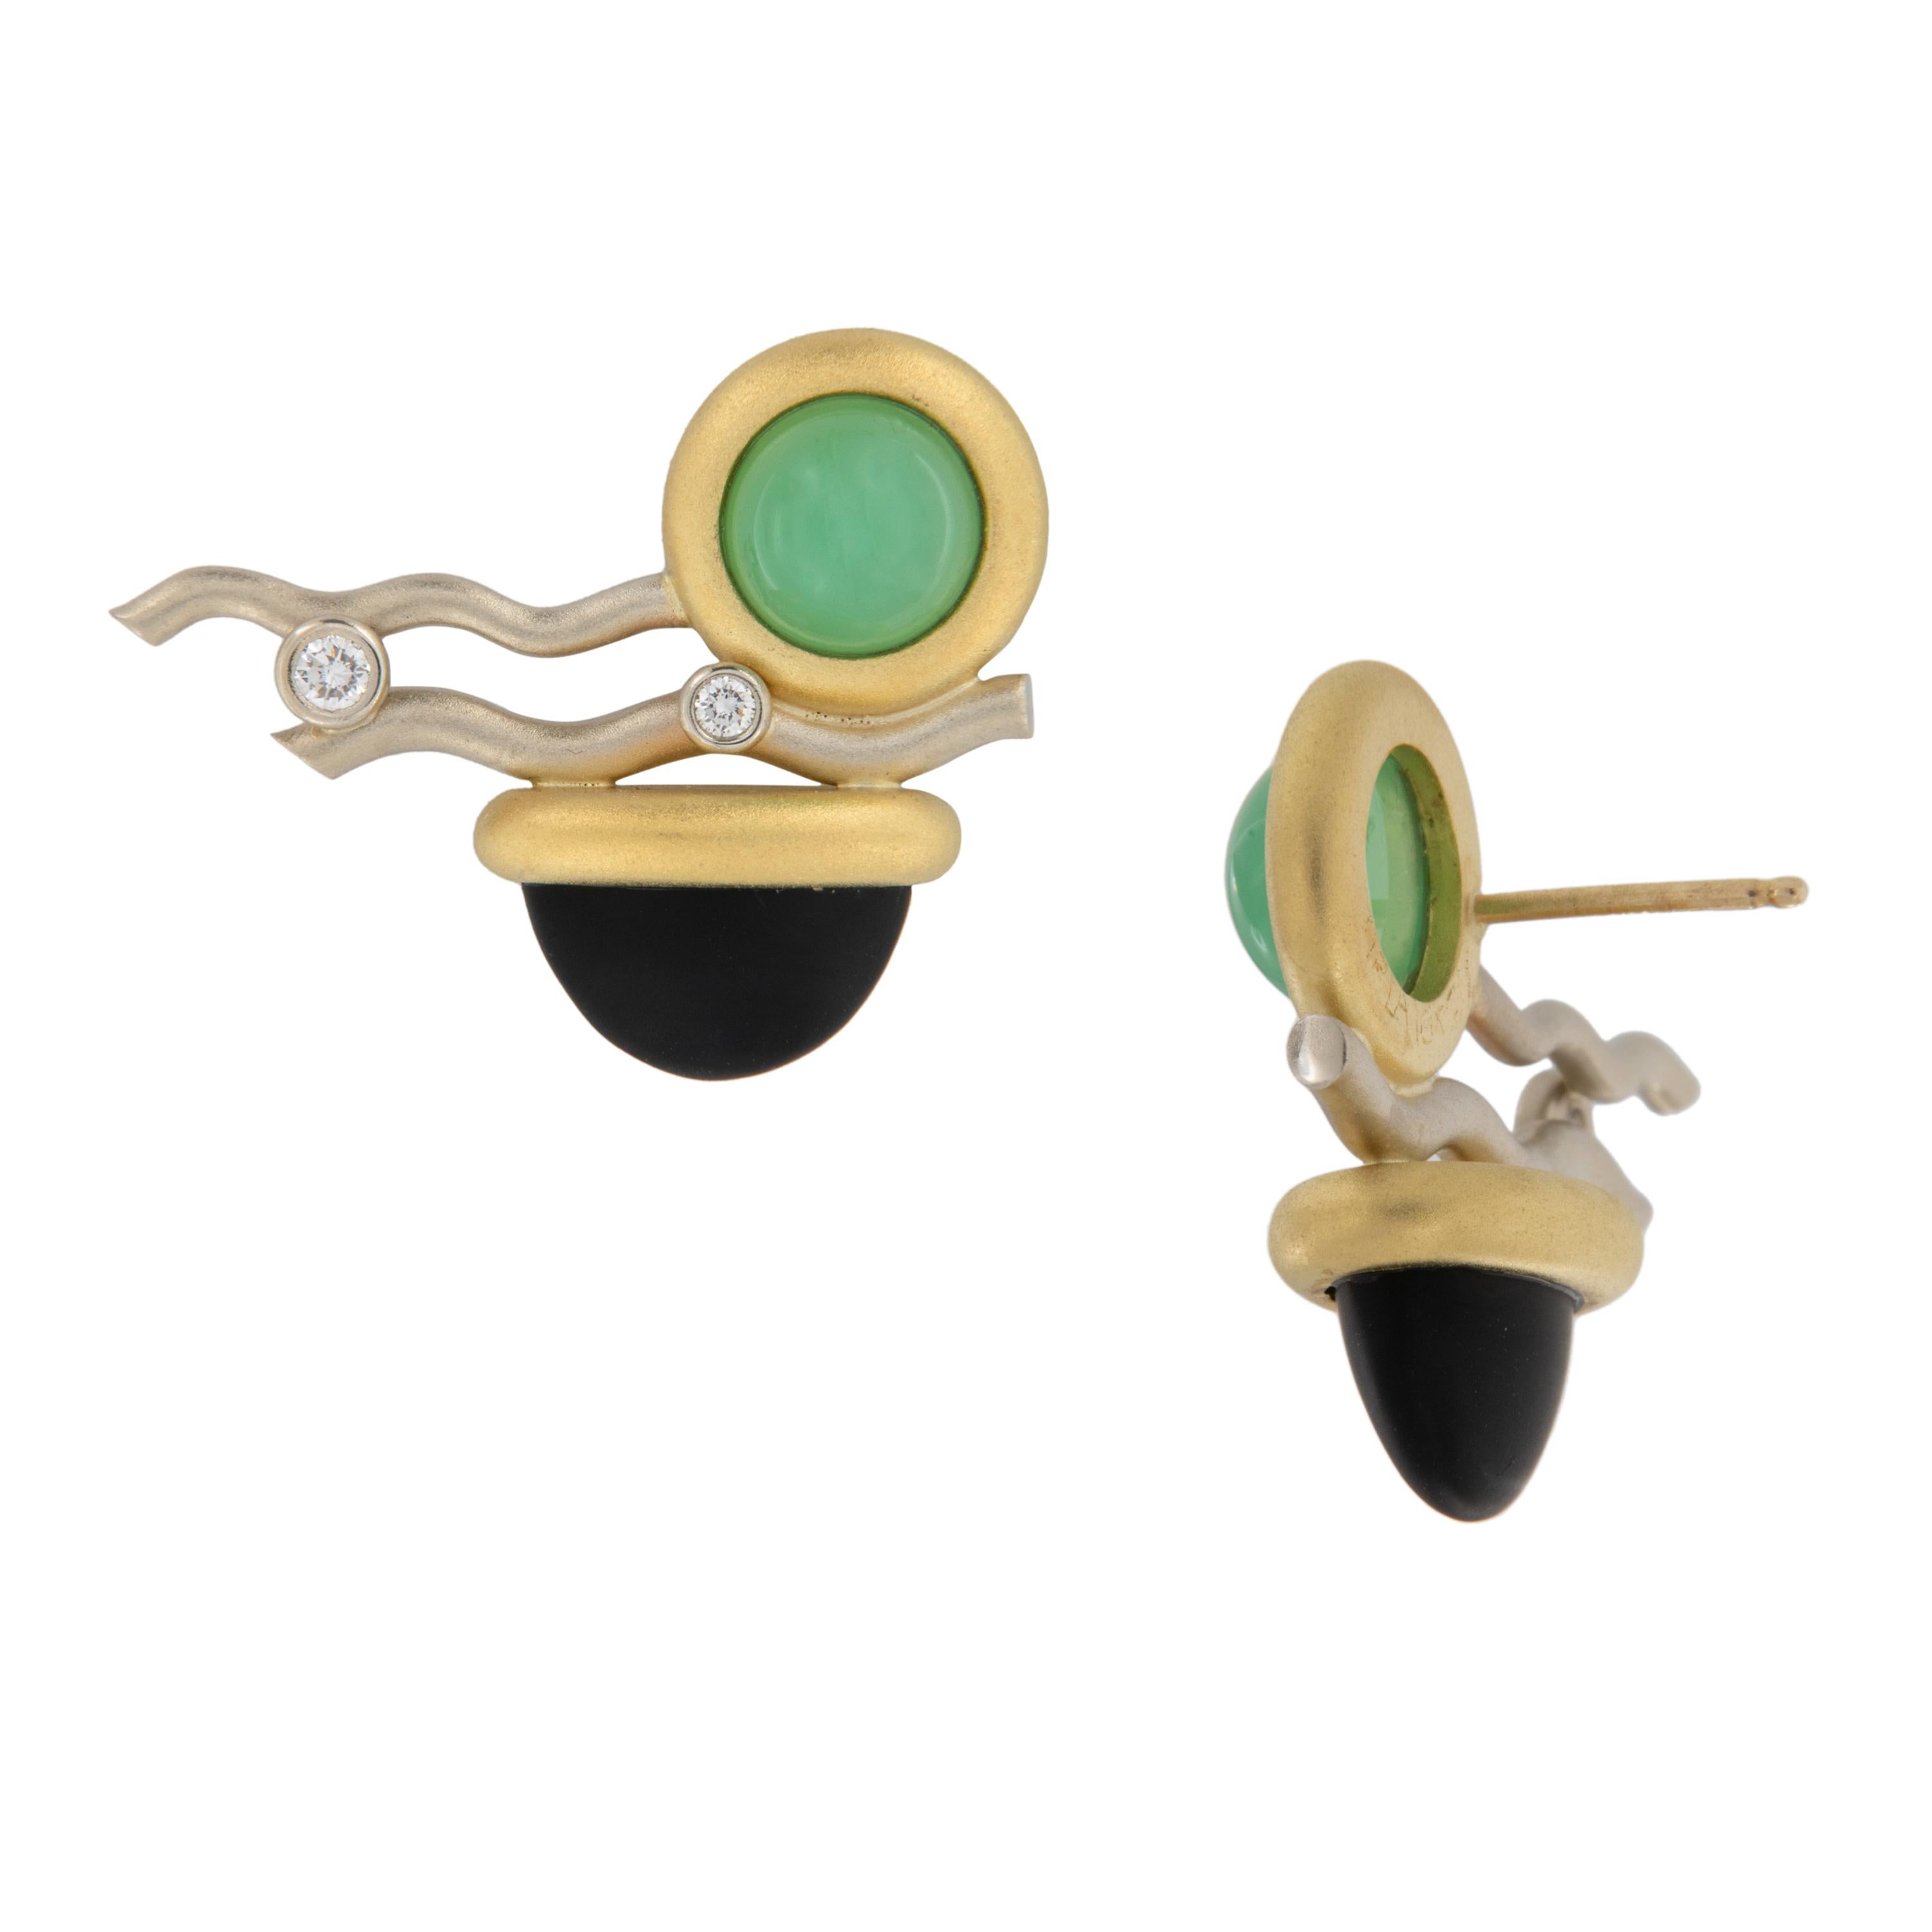 Classical and progressively modern describes Patrick Irla's jewelry. He hand makes his pieces through lost wax casting in his studio from start to finish with attention to detail and these whimsical earrings are proof of that! Featuring yellow and